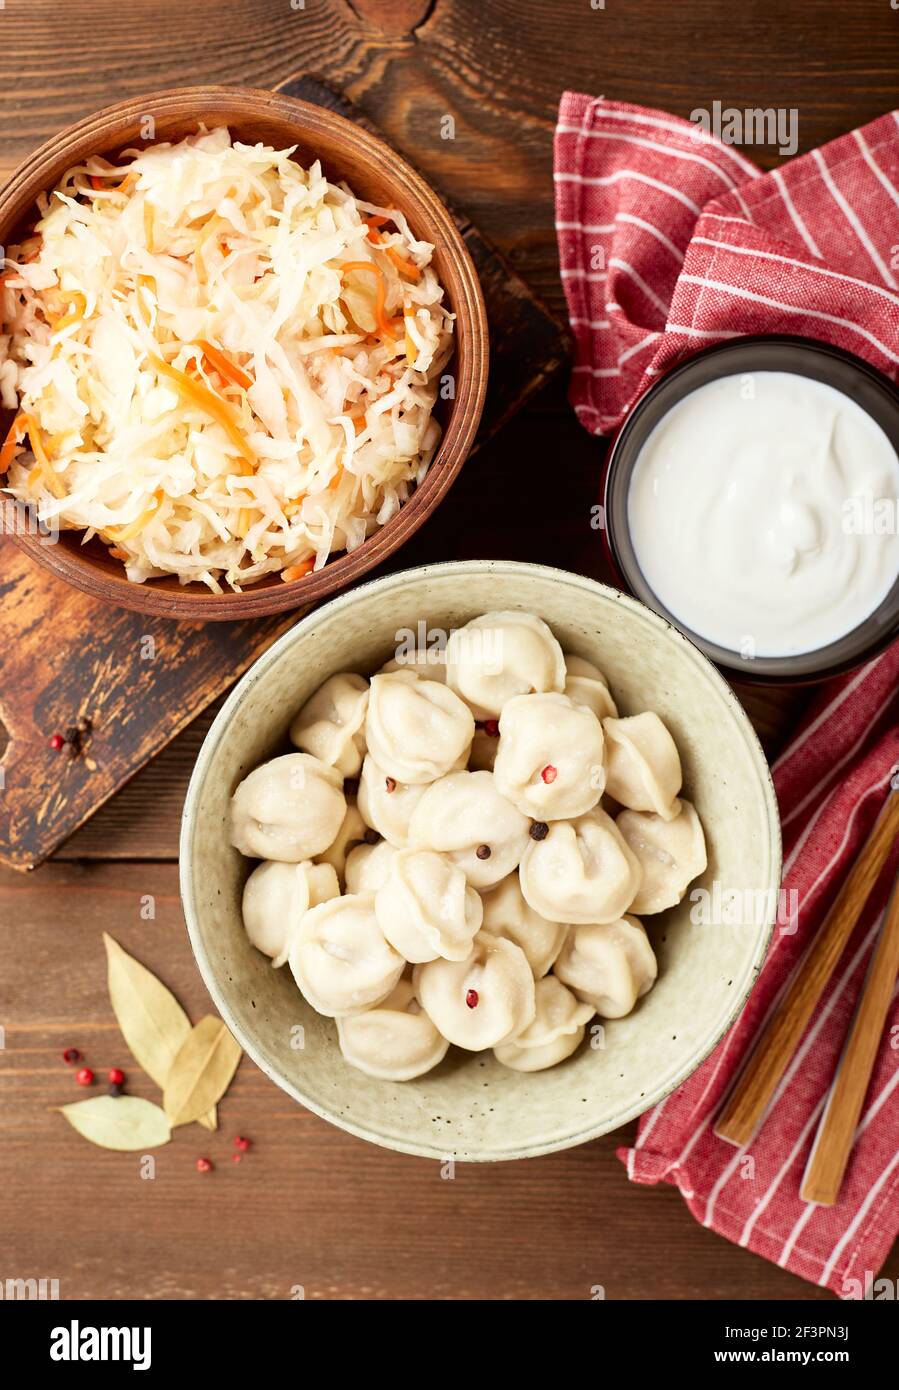 Traditional Russian pelmeni dumplings with sour cream and sauerkraut with sour cream over wooden background. Top view, flat lay. Stock Photo